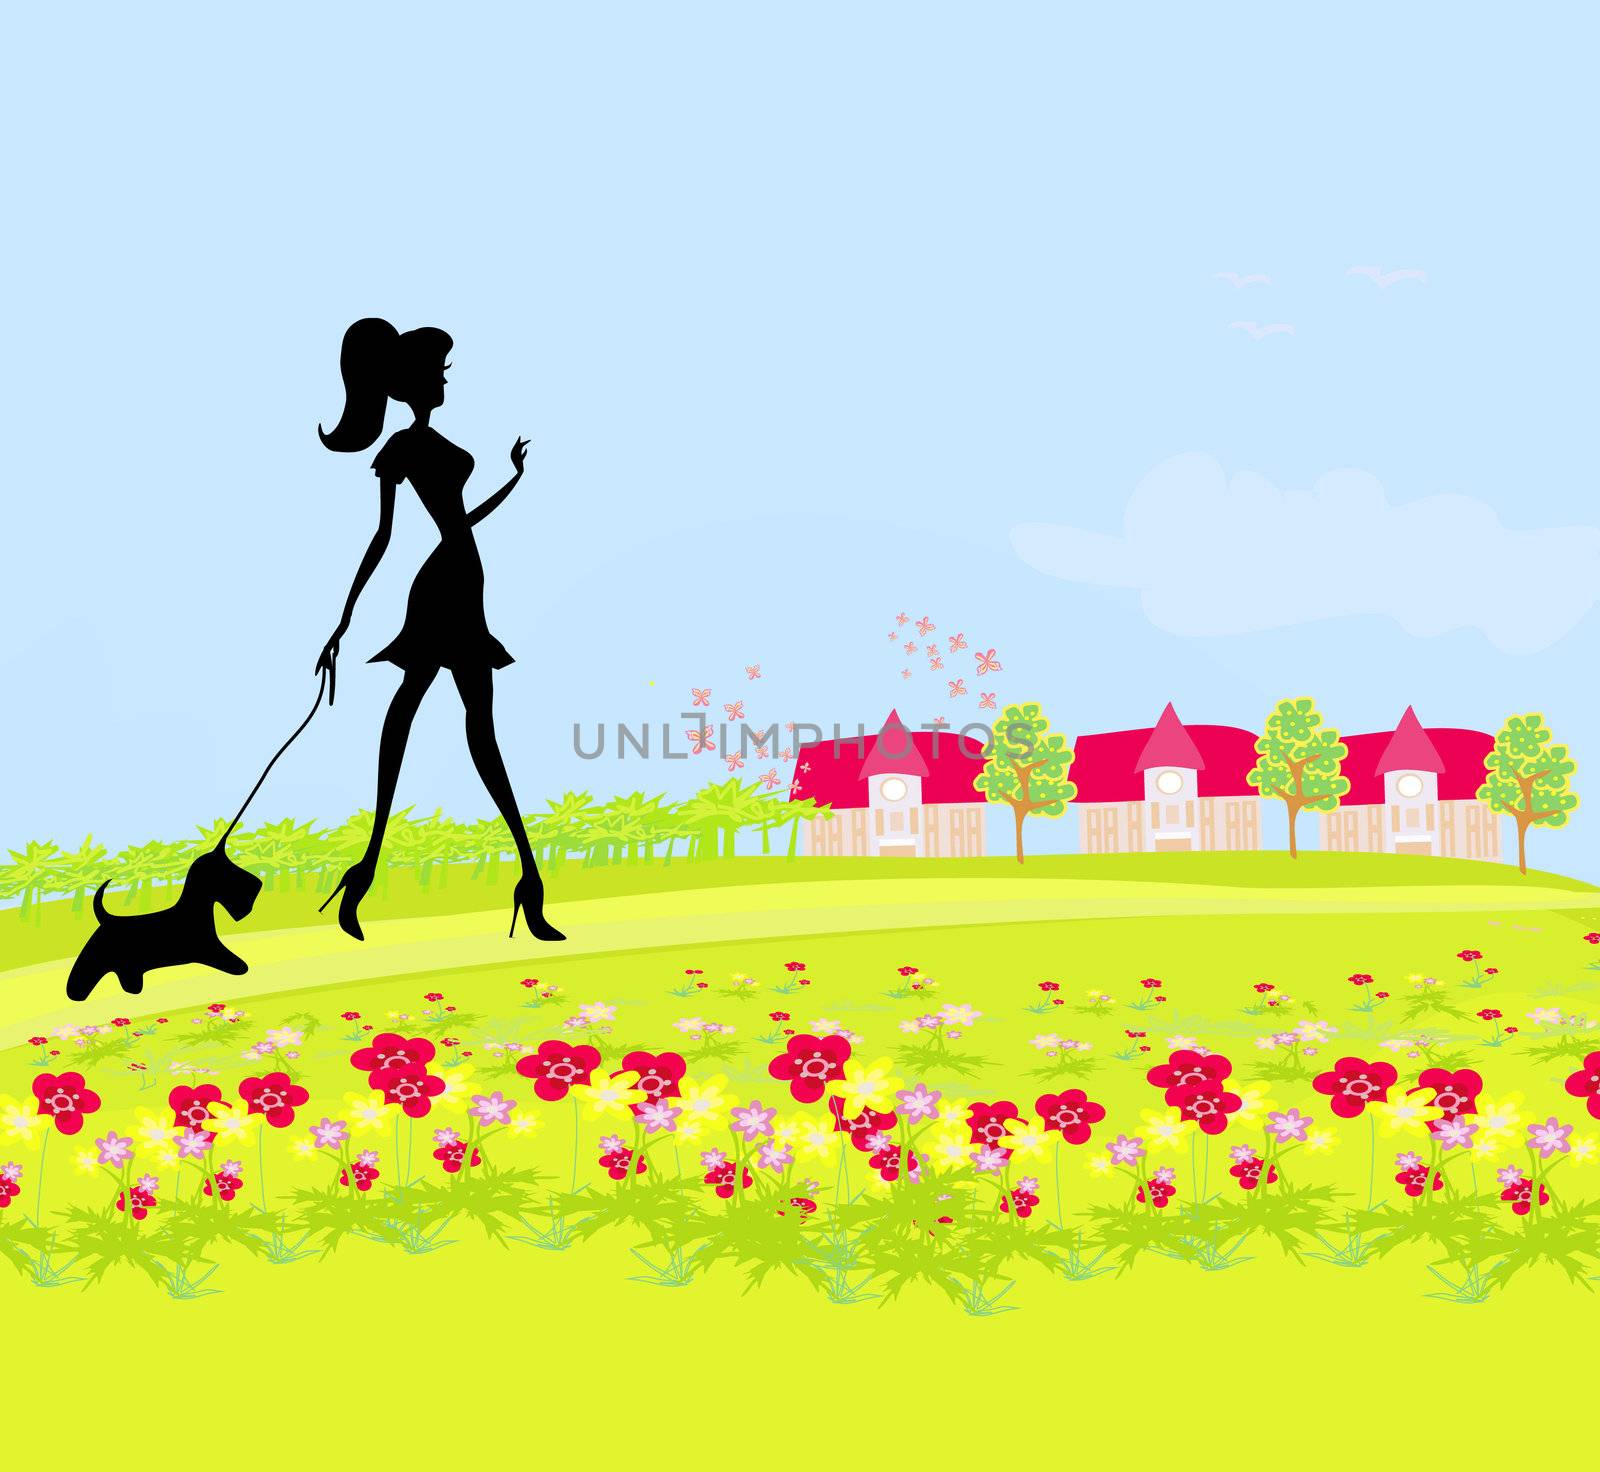 Pretty girl walking the dog by JackyBrown